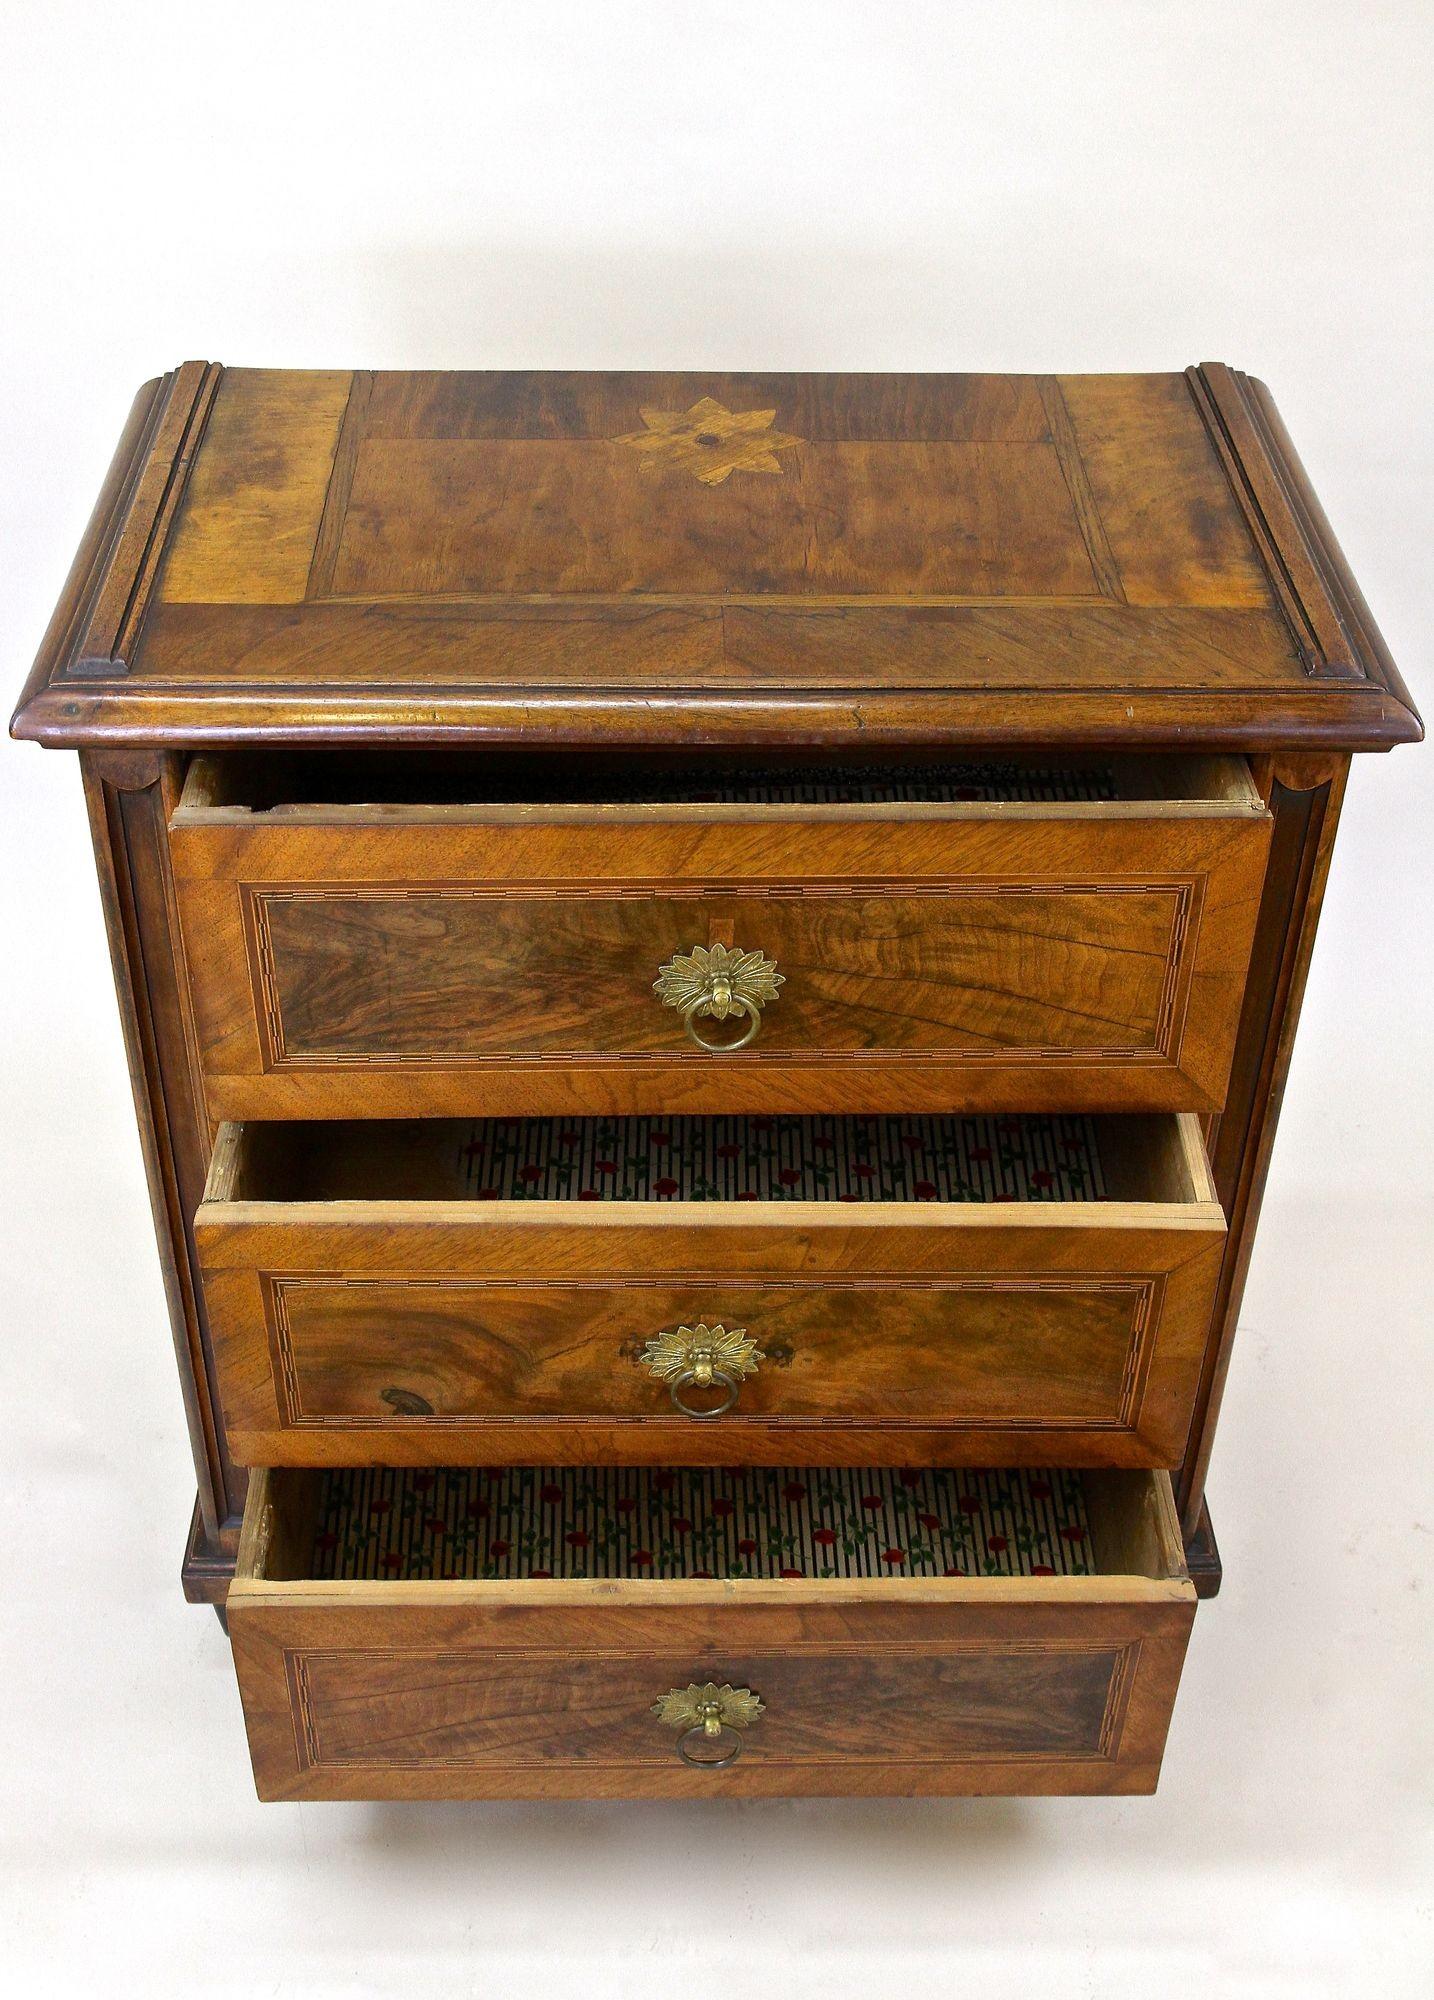 19th Century Biedermeier Nutwood Chest Of Drawers With Micro-Inlays, AT ca. 1850 For Sale 5